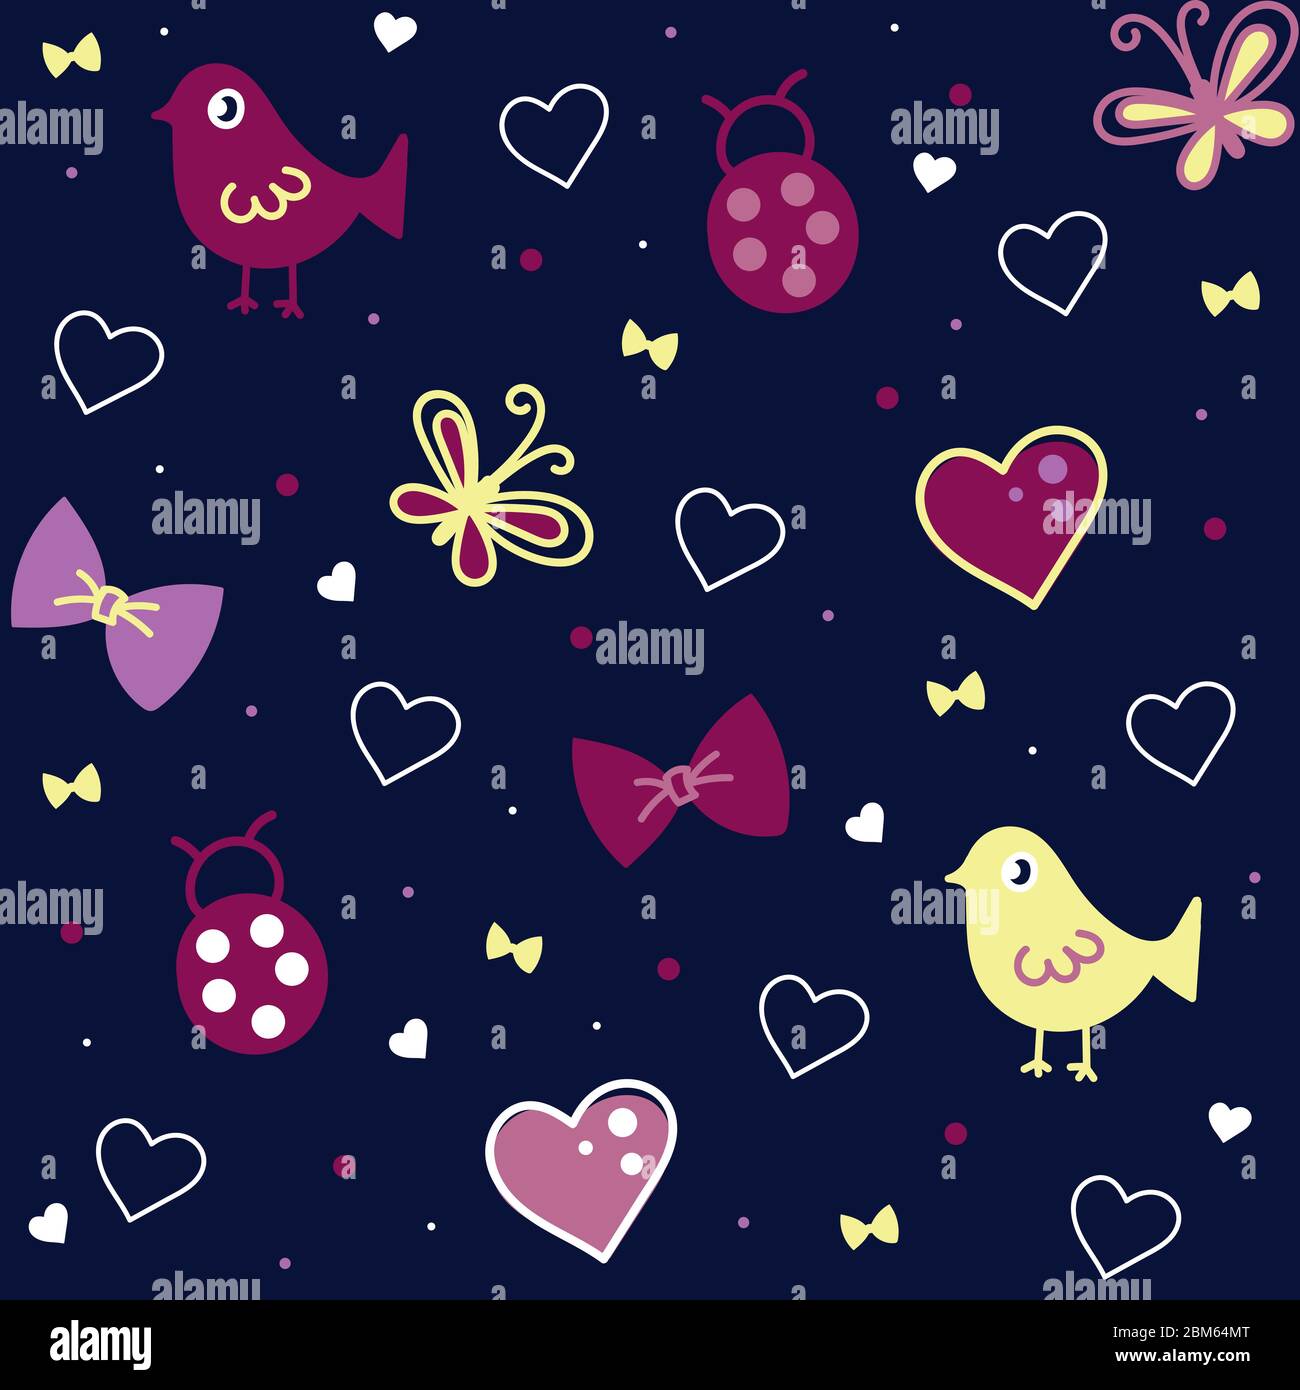 cute birds, ladybugs, bows, hearts on a dark background, seamless vector pattern for girls, pink, yellow, white color. for printing on fabric, paper Stock Vector